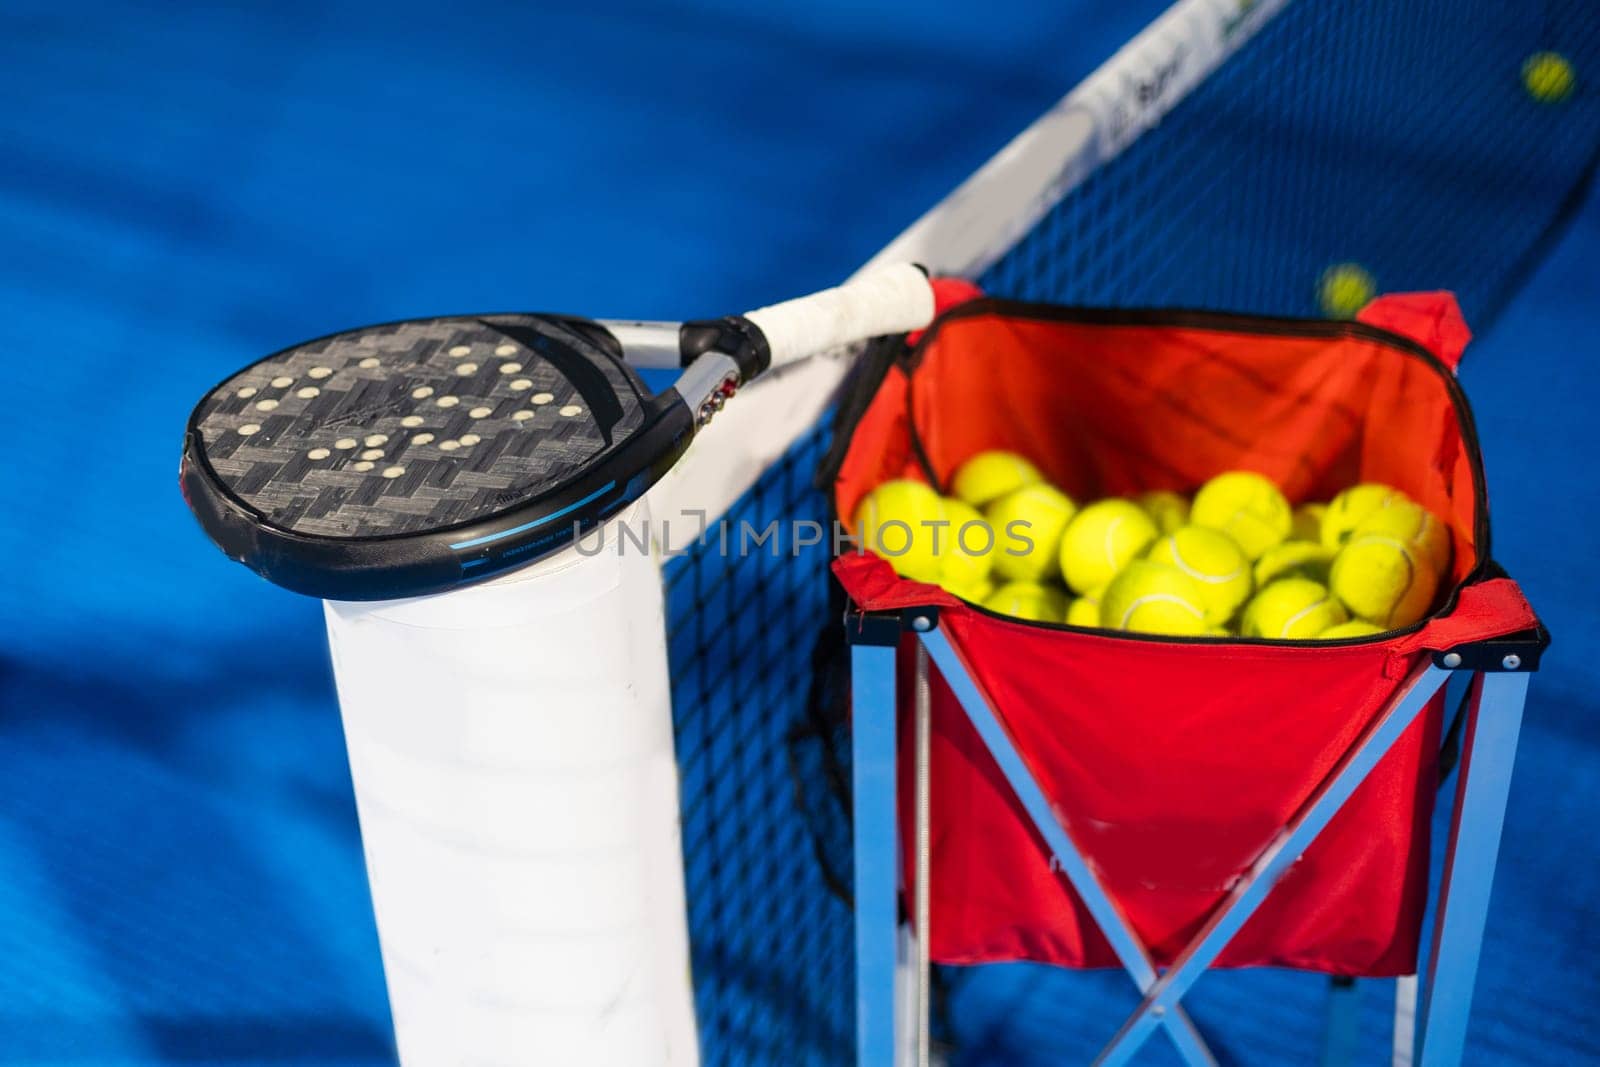 paddle tennis racket and balls on the blue paddle court by Andelov13